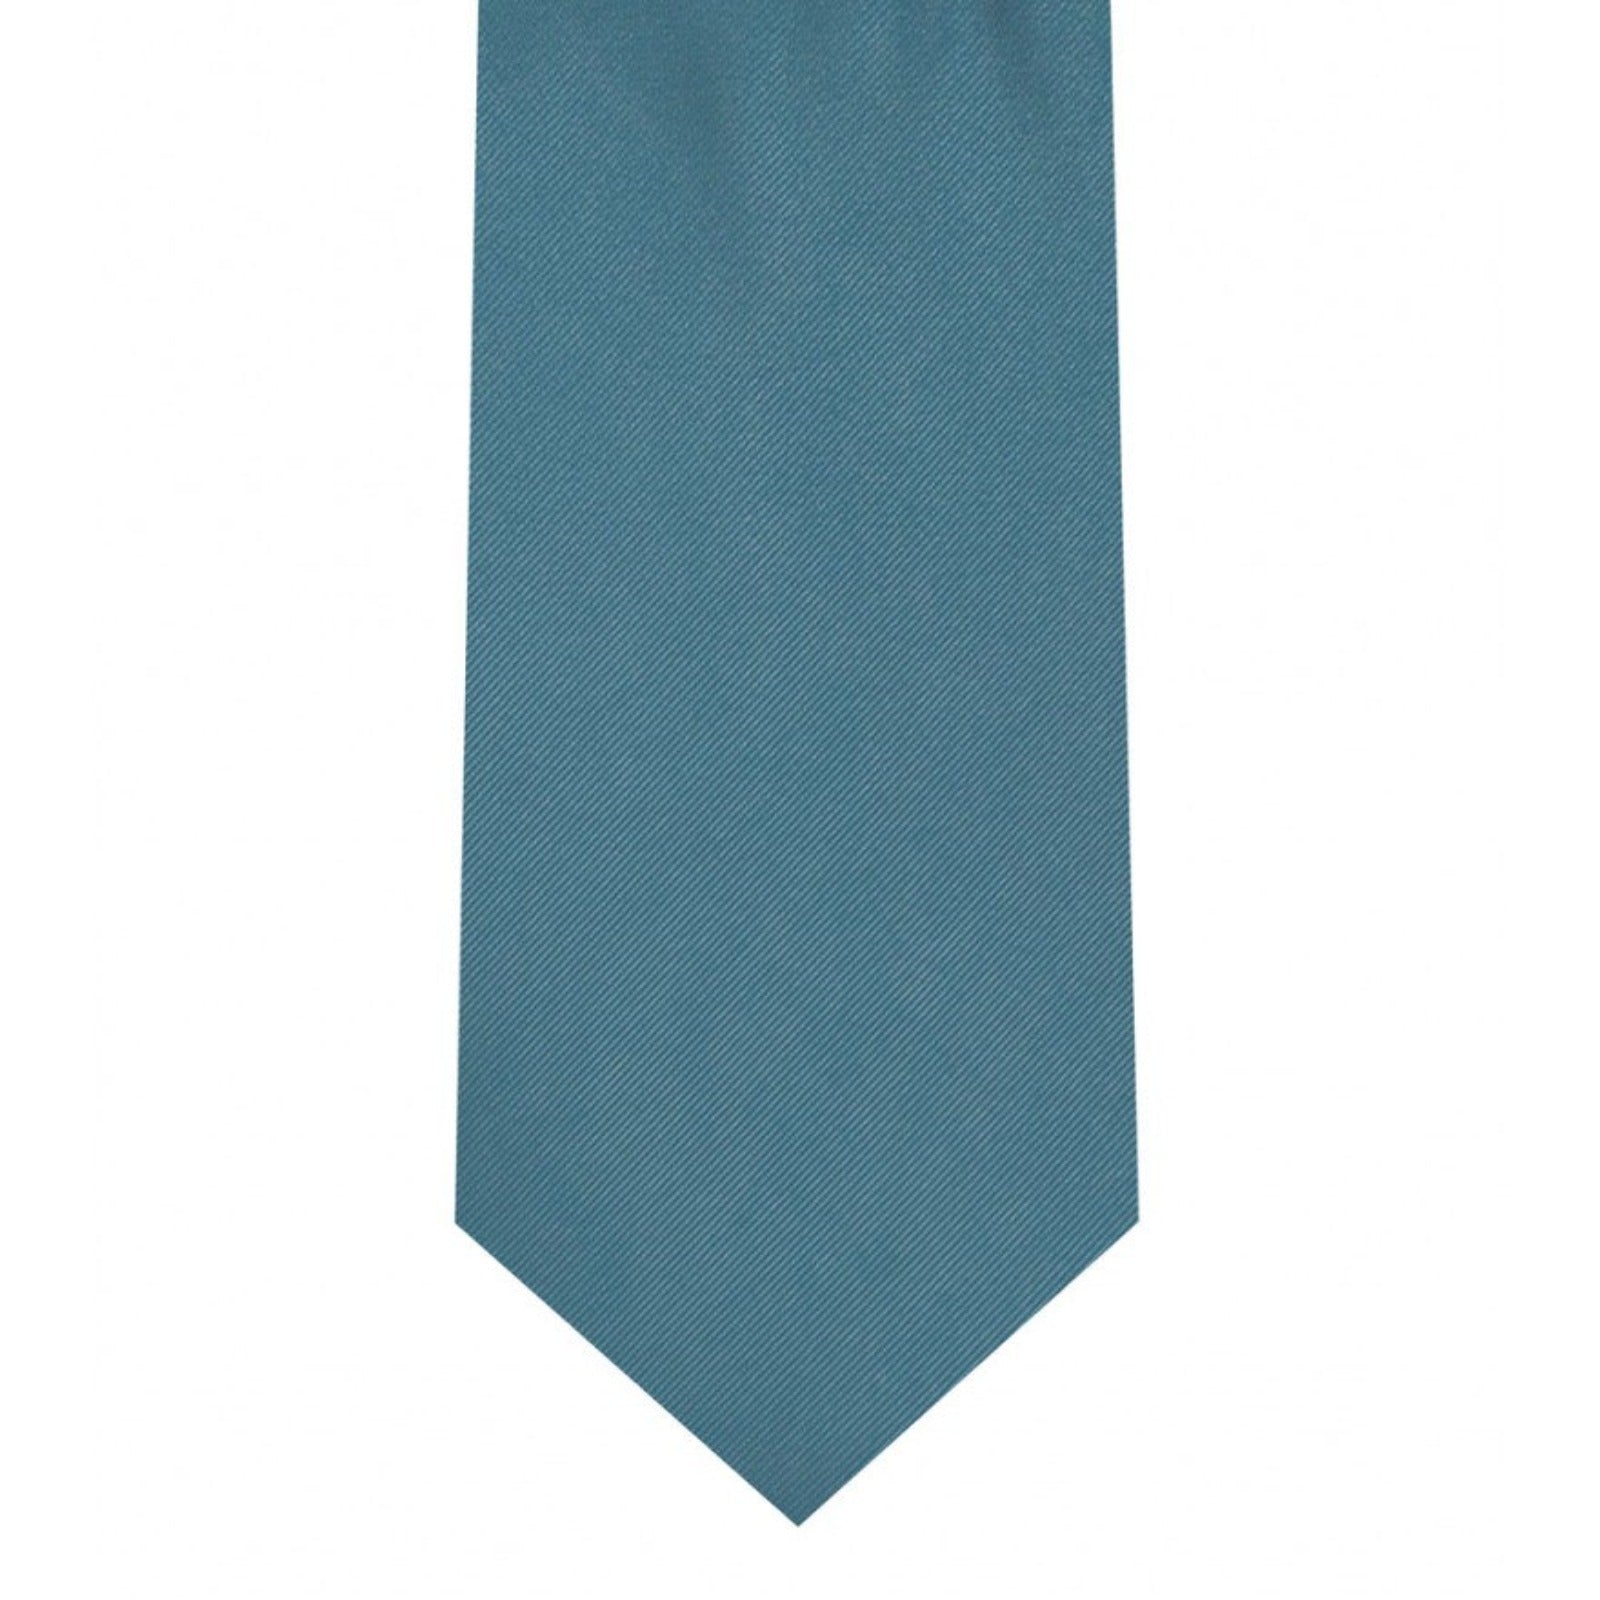 Classic Carolina Blue Tie Skinny width 2.75 inches With Matching Pocket Square | KCT Menswear 